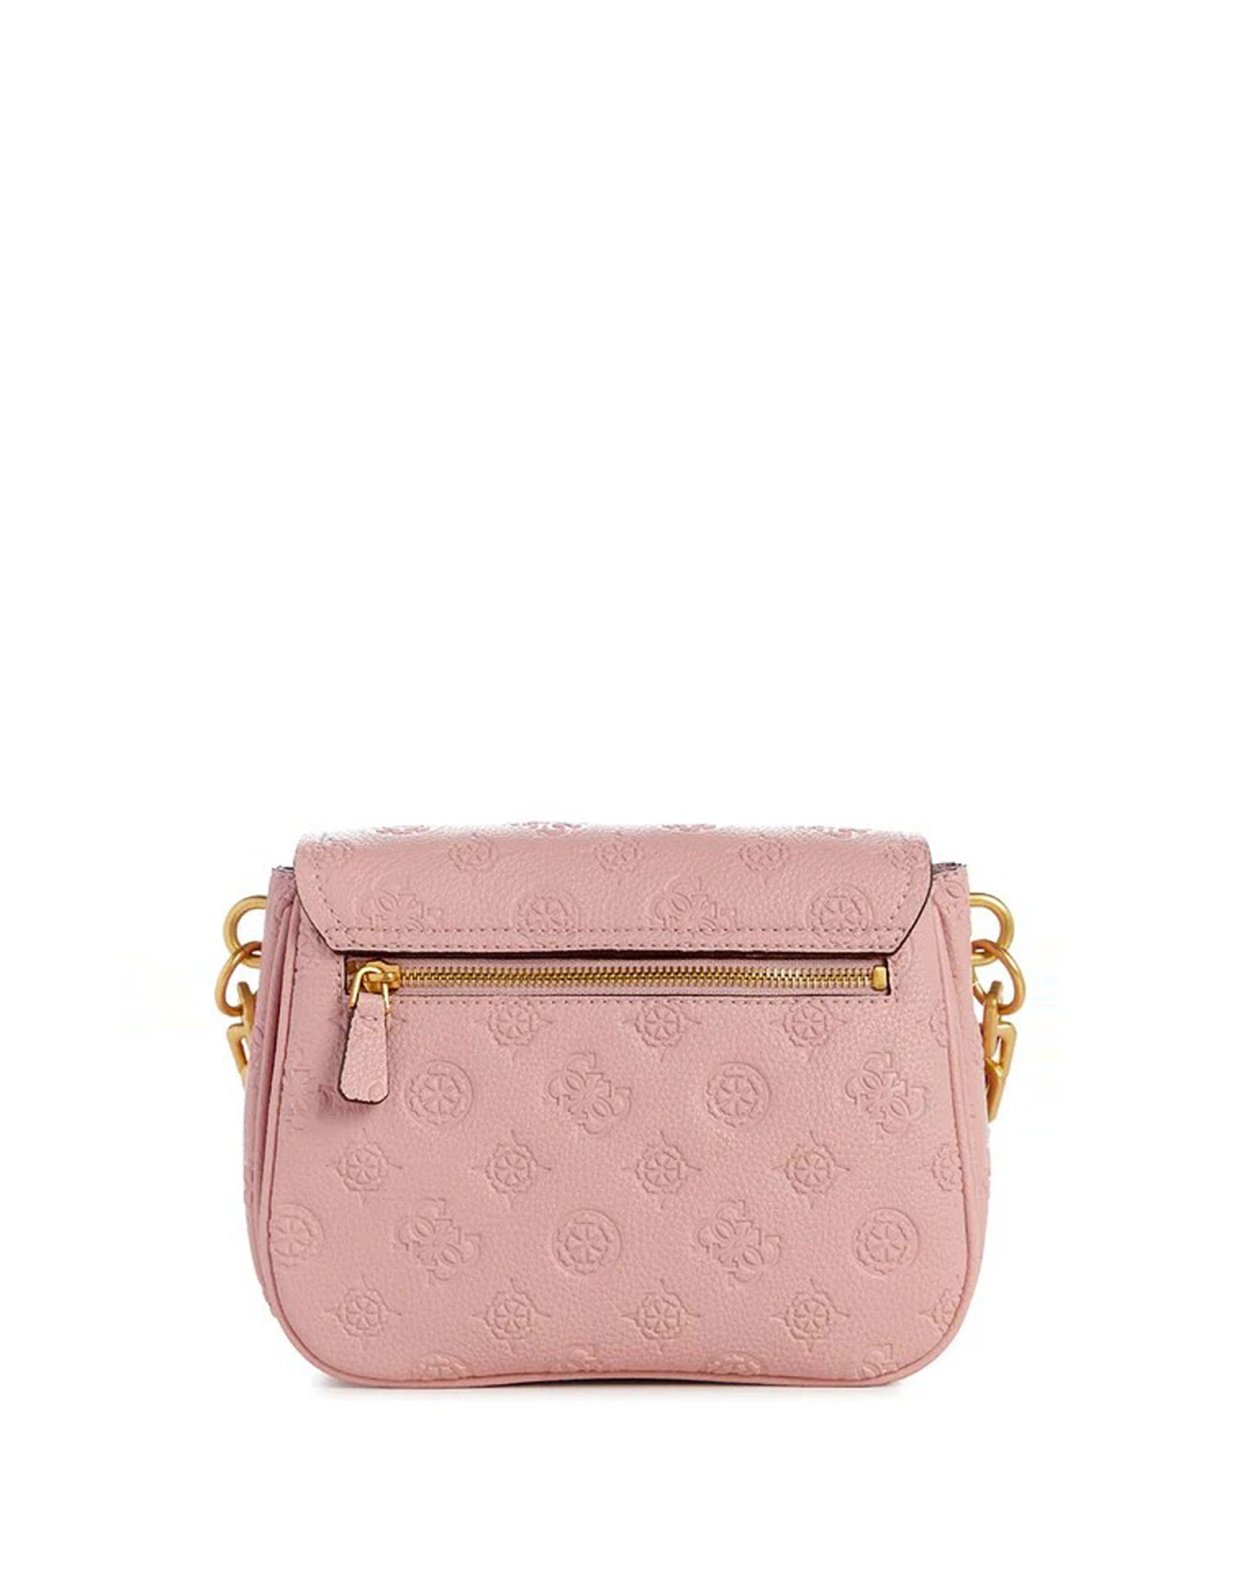 Guess Izzy peony crossbody compartments bag apricot rose logo